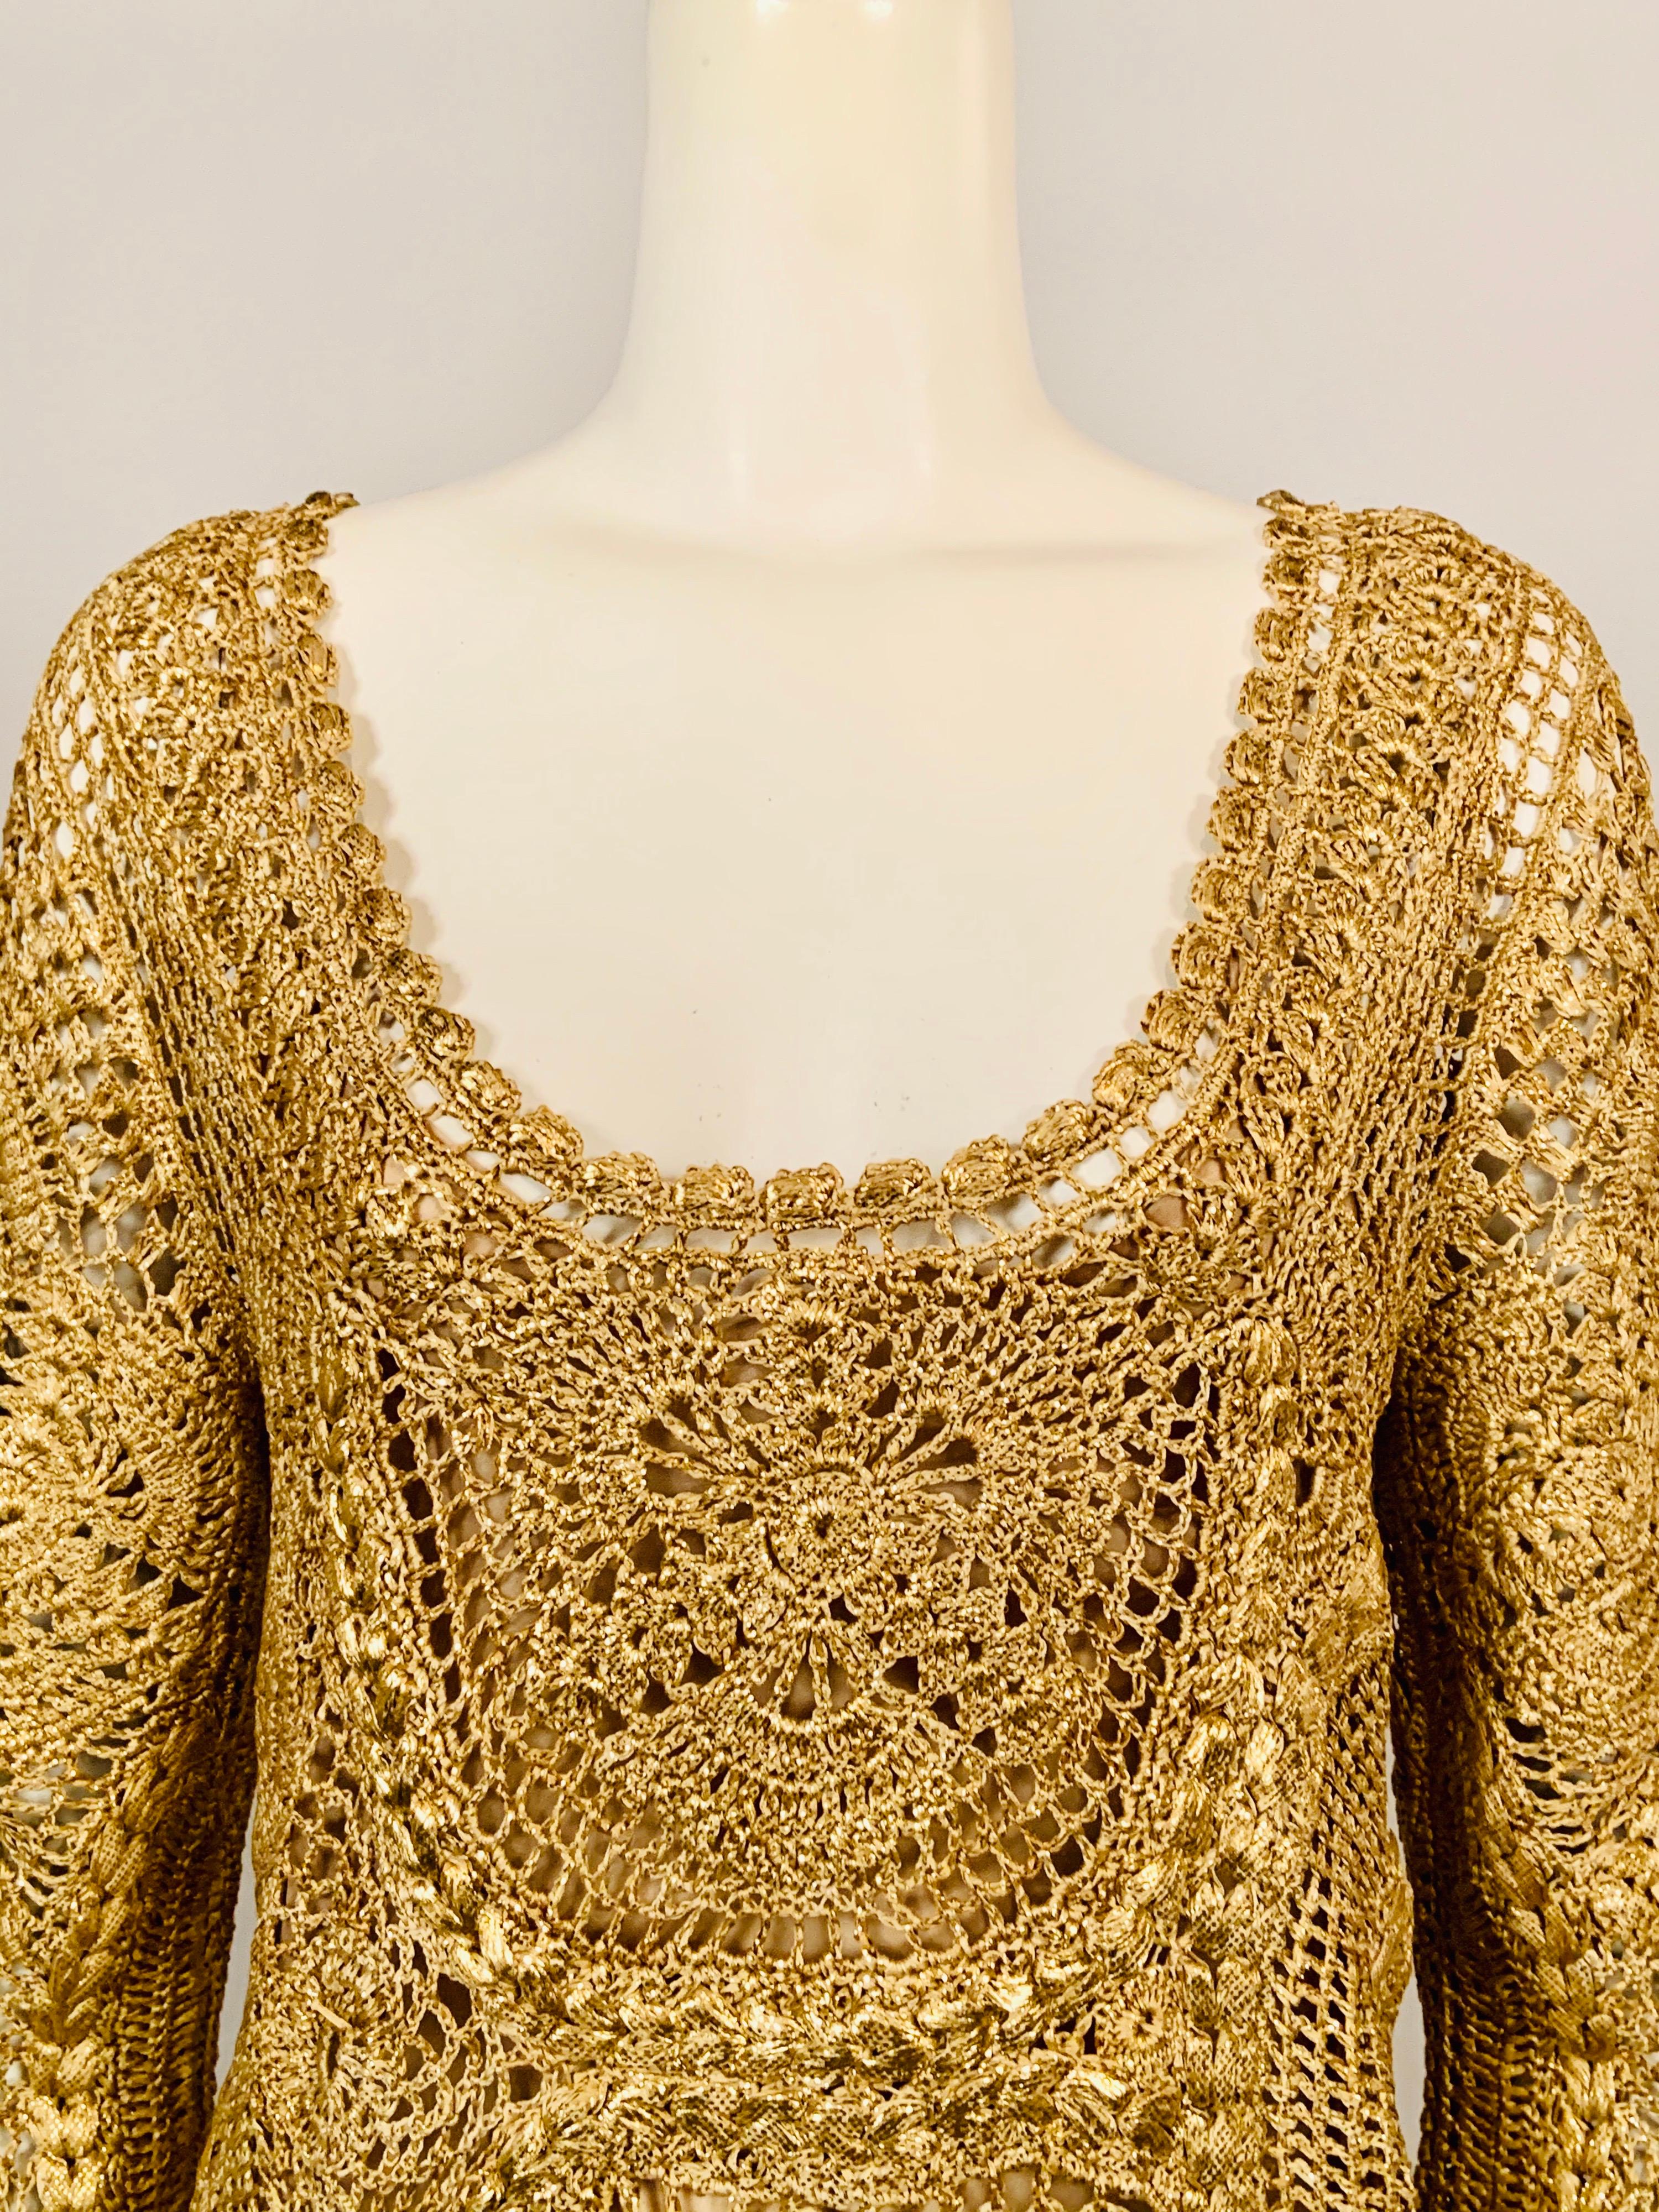 Oscar de la Renta designed a luxurious gold silk hand crocheted pullover tunic for the Spring 2010 collection. The top has a scoop neckline, three quarter length sleeves, and a scalloped hem.  It comes with a pale gold camisole made from two layers